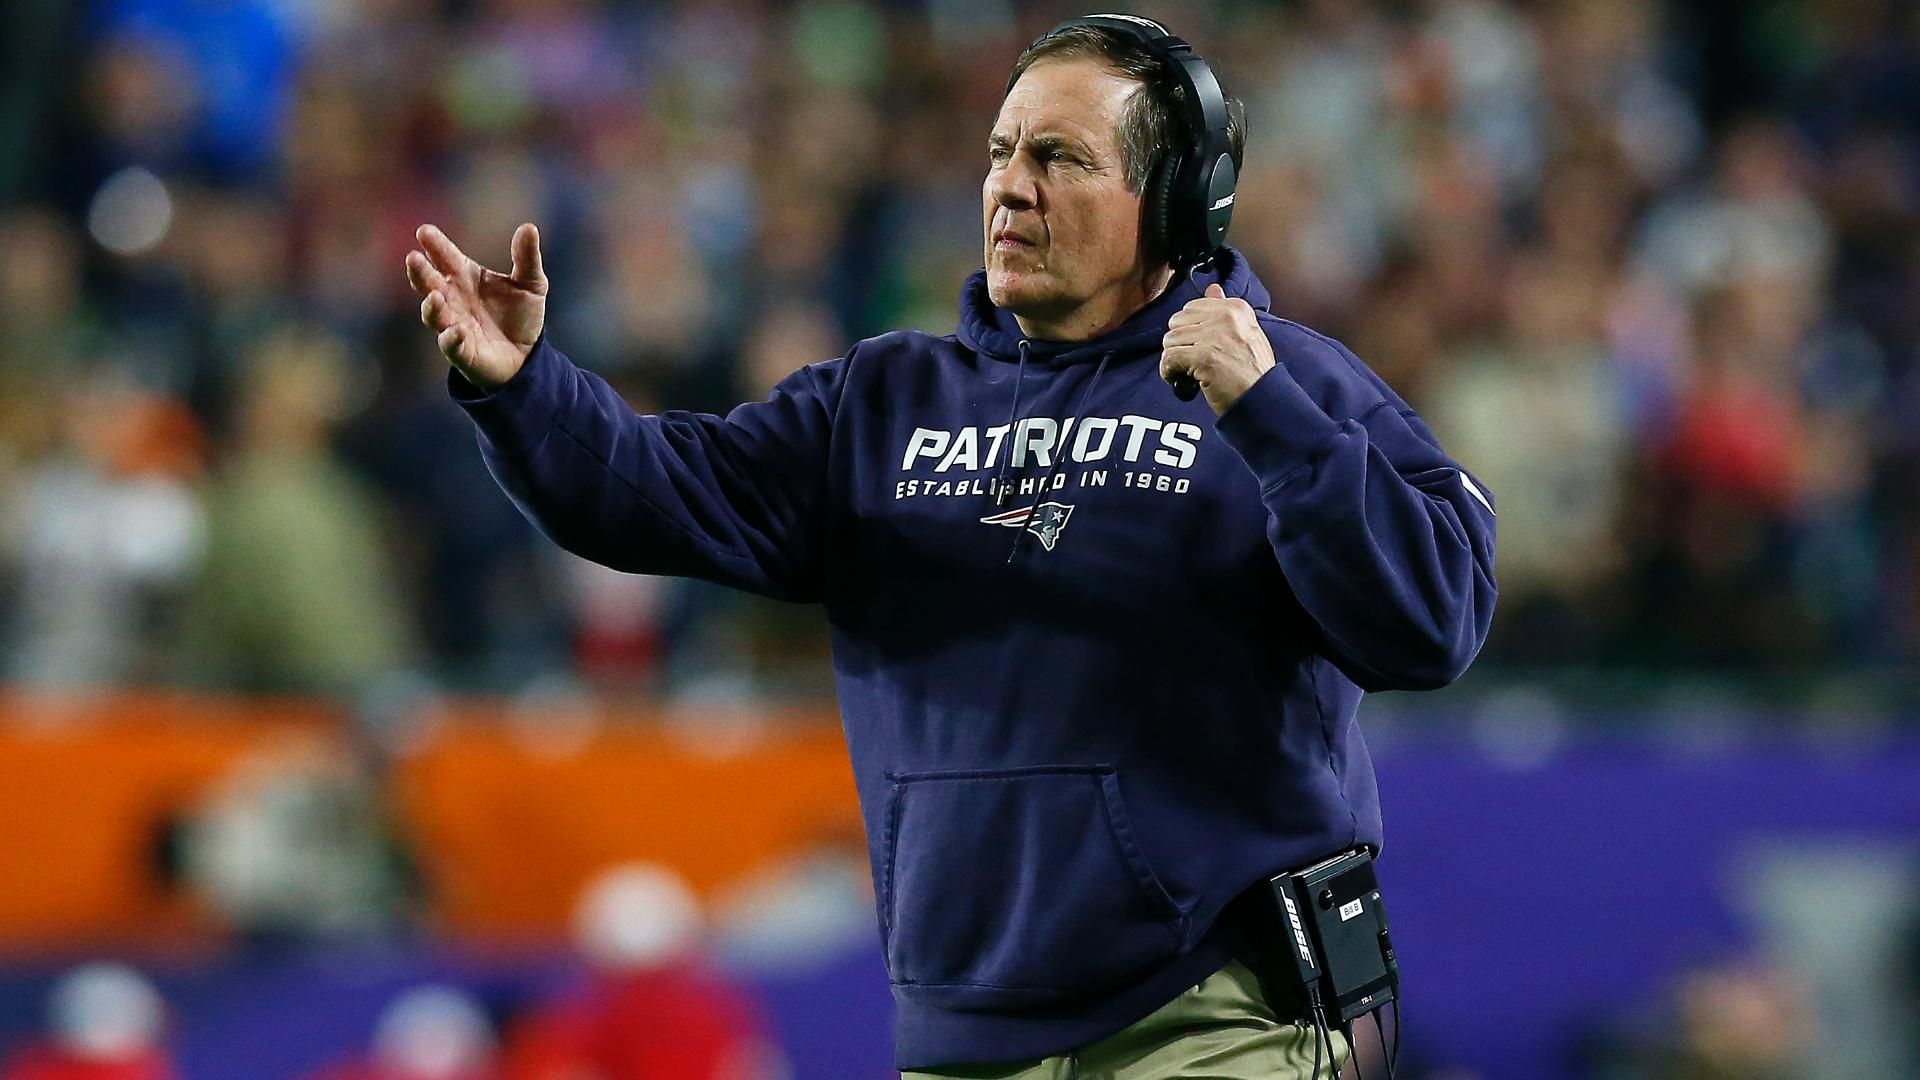 Belichick's worst nightmare: Pats lose due to unnecessary last-second  lateral